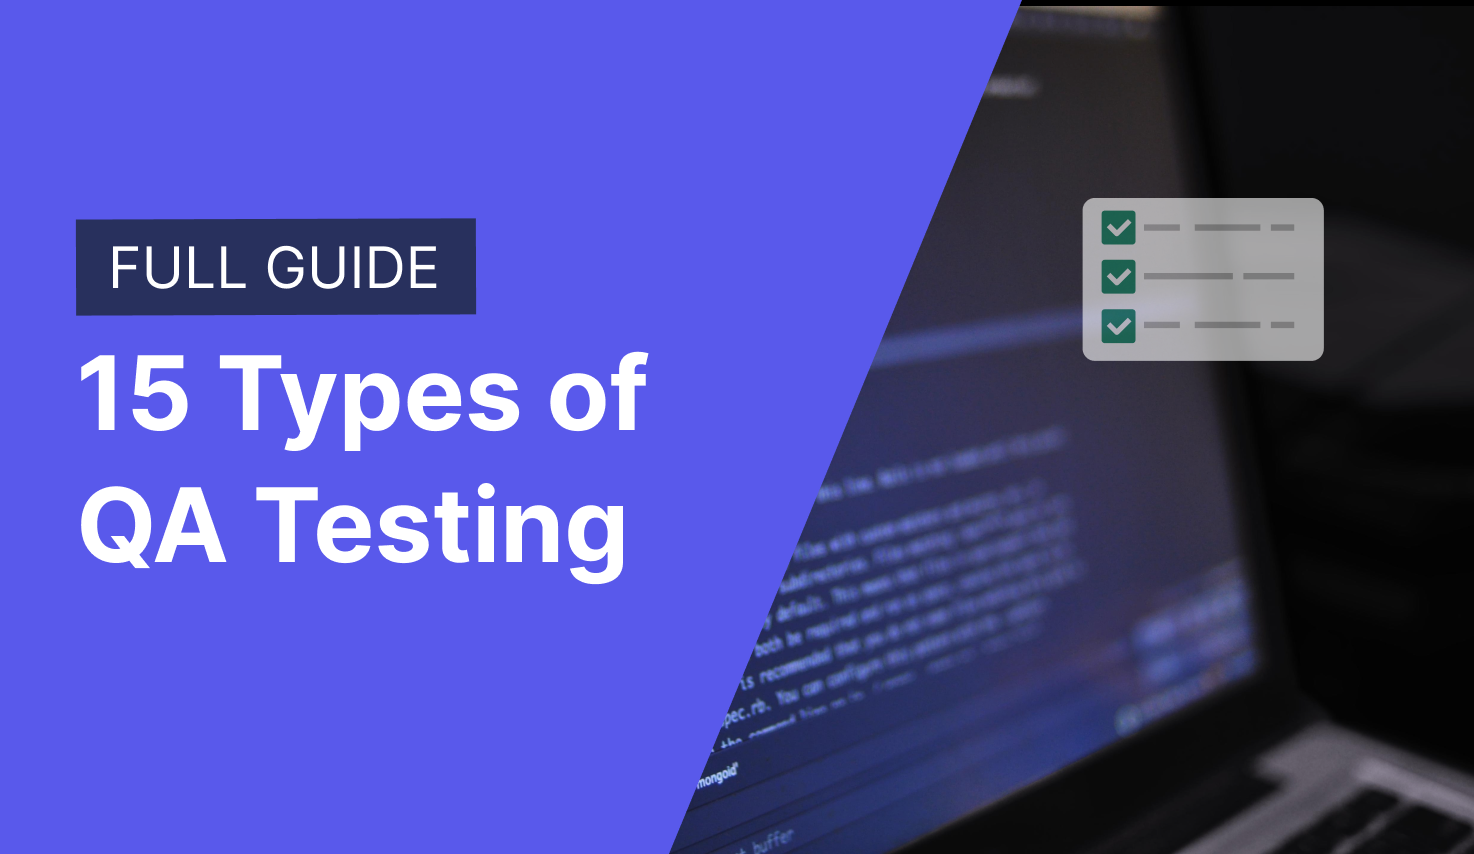 15 different testing types every QA should know